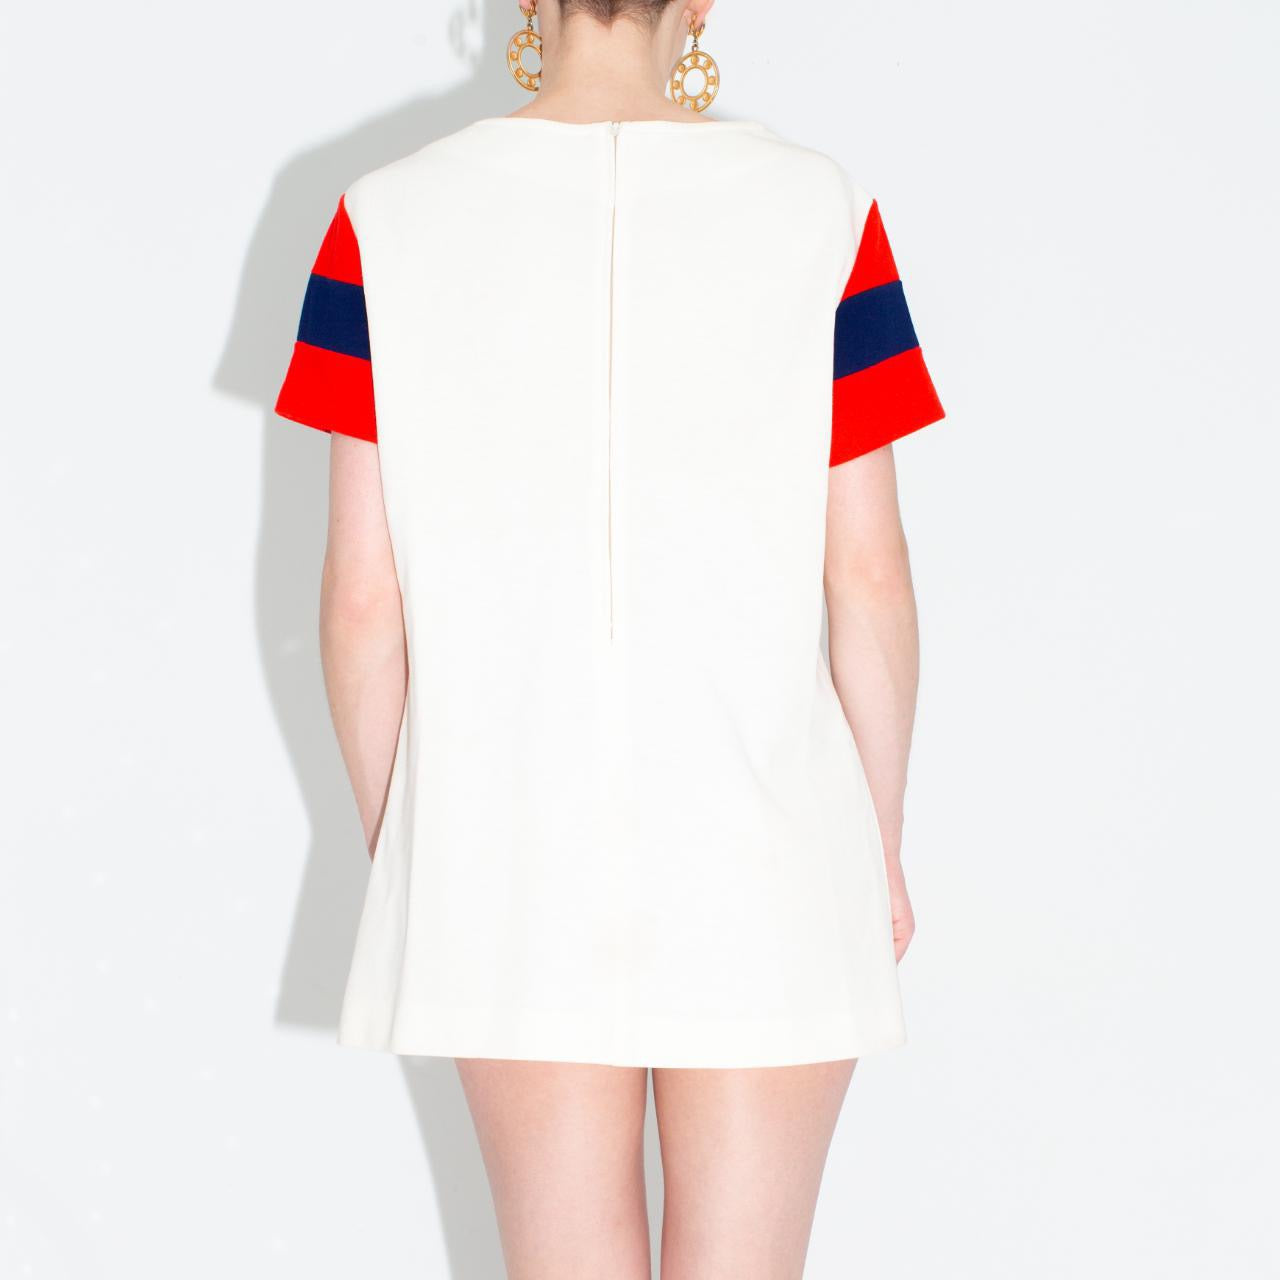 Vintage 60s White Tunic/Minidress with Navy/Red Sailboat